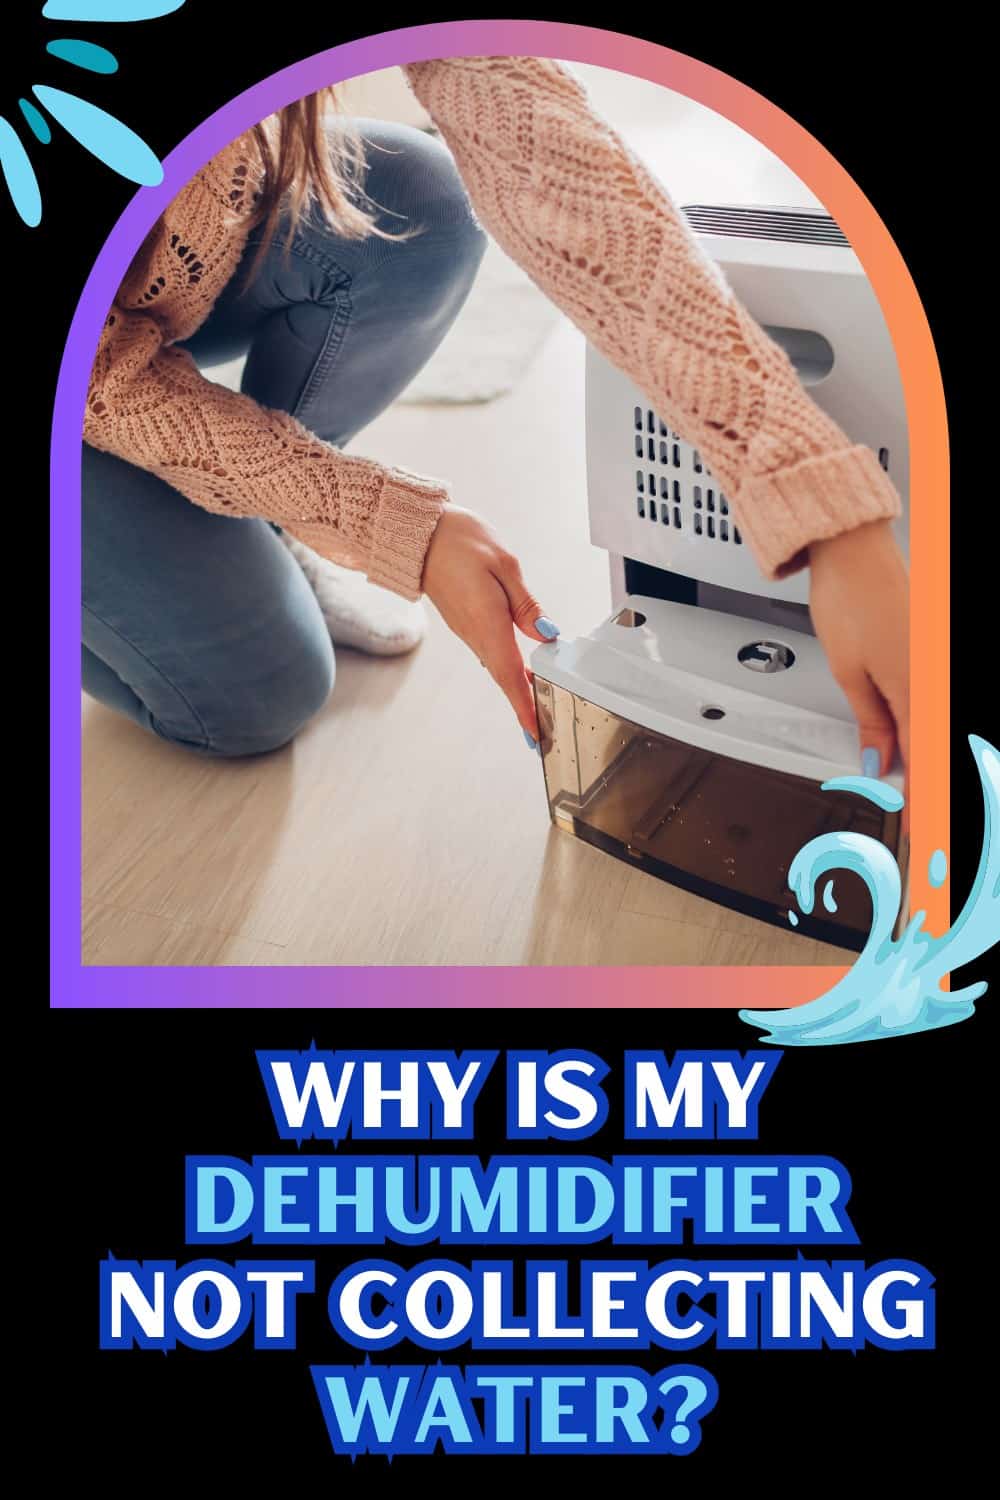 clogged filters can hinder water collection in your dehumidifier